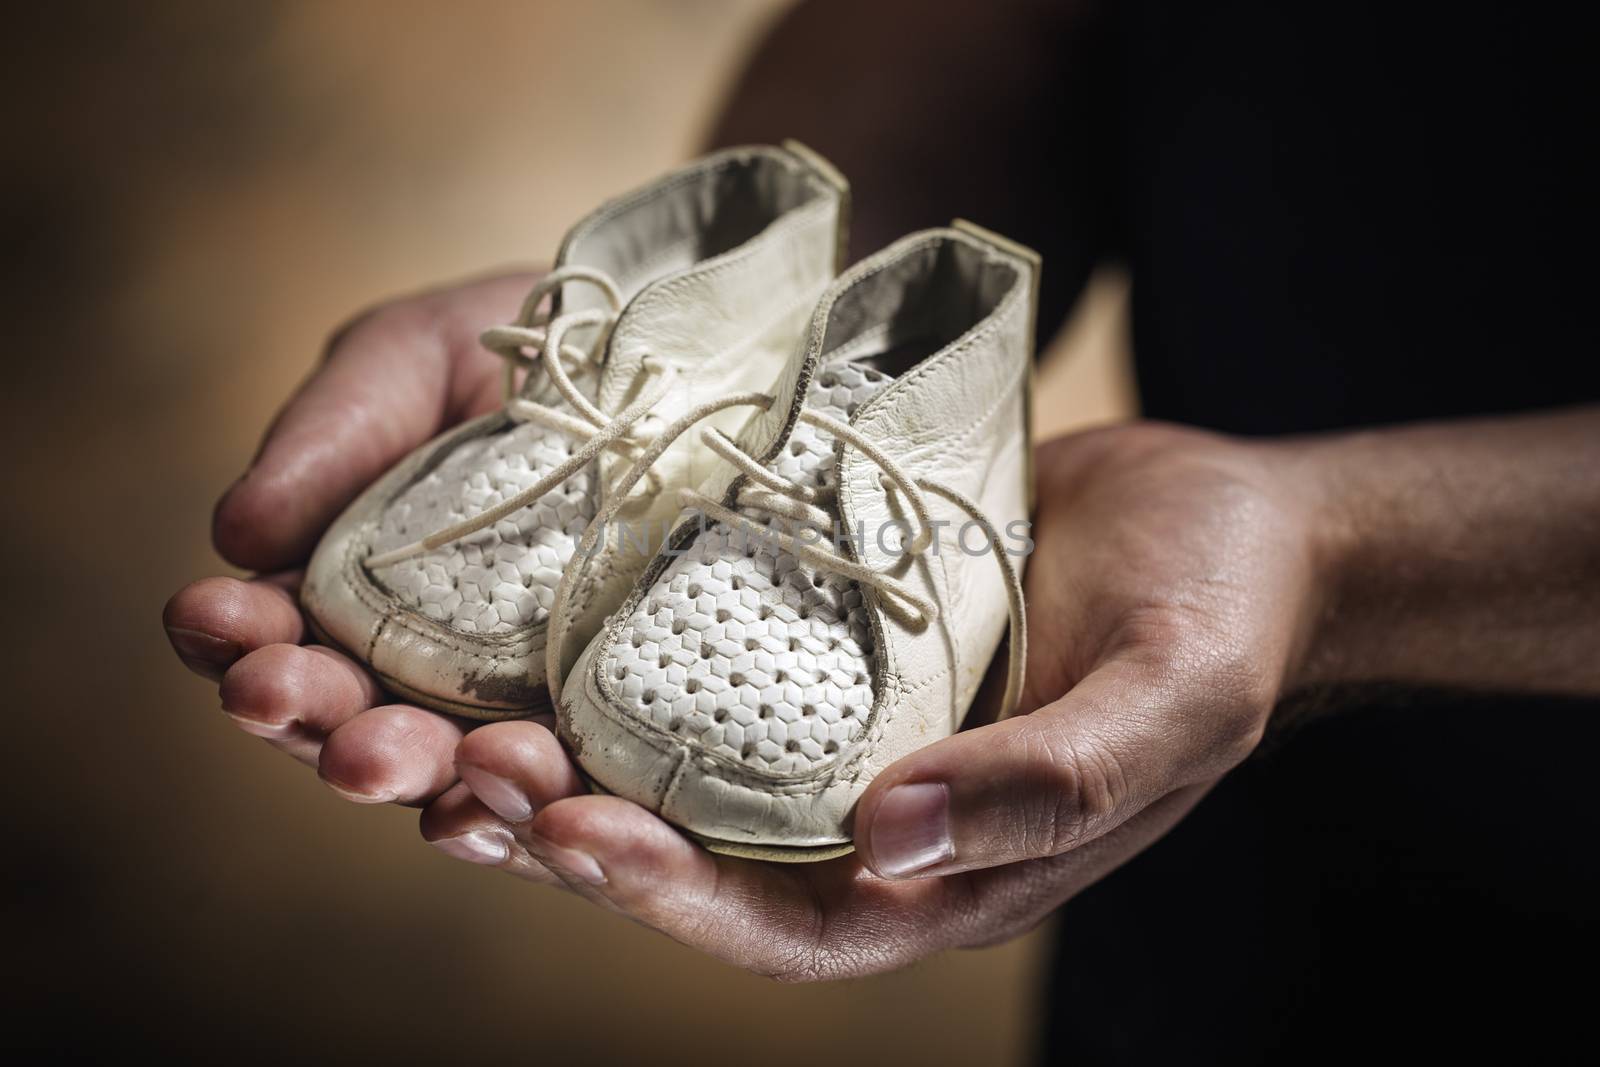 Baby Shoes by Stocksnapper